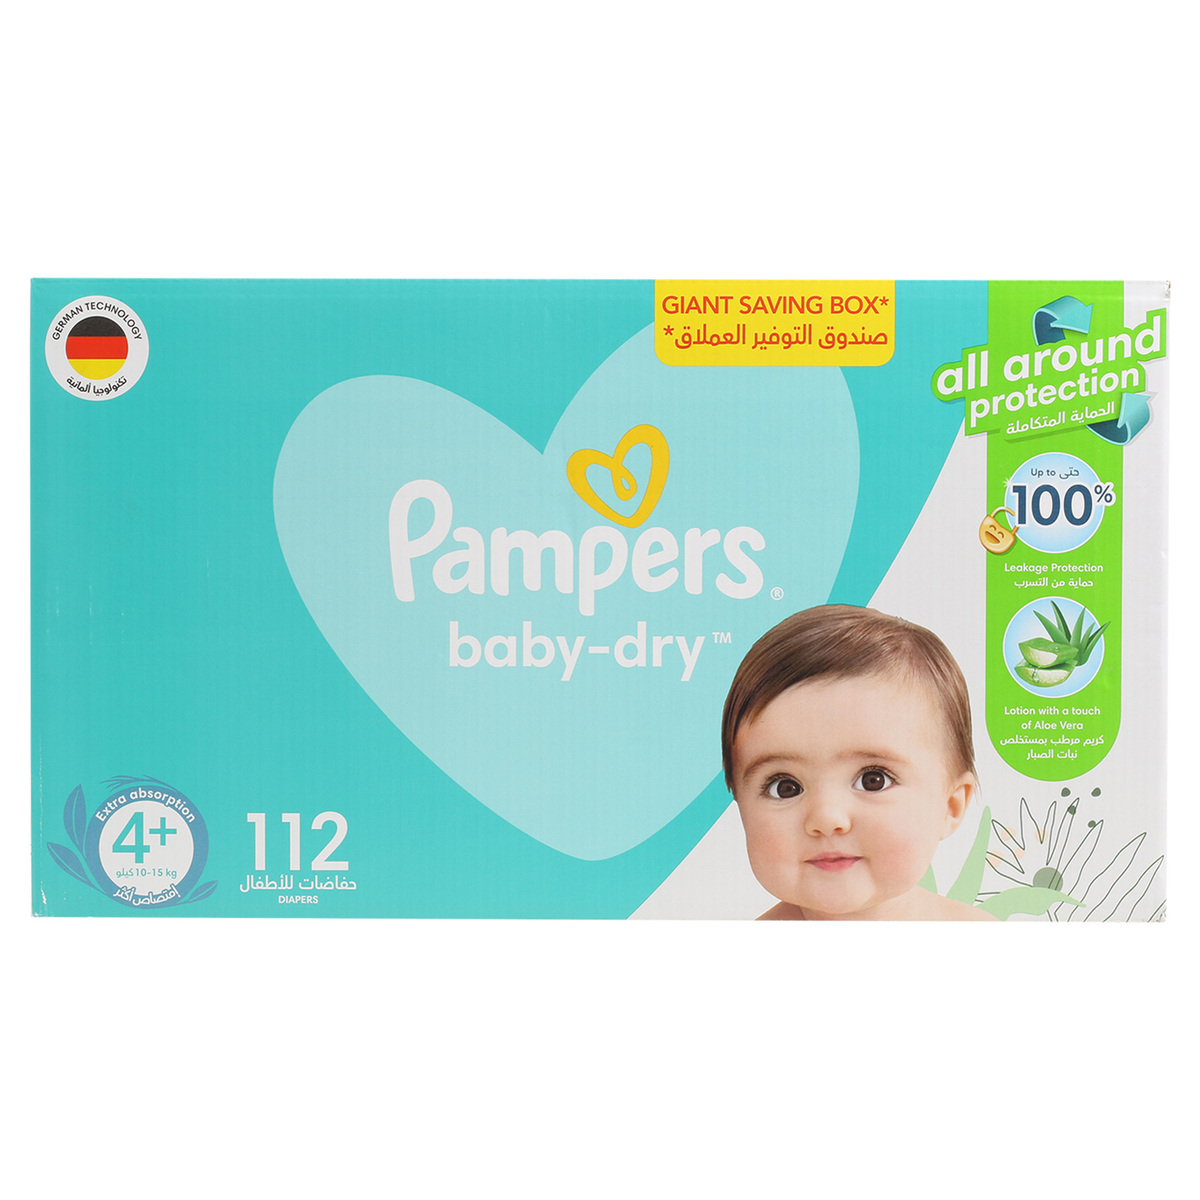 Pampers taille 4 ( 9-18KG ) 32Pcs